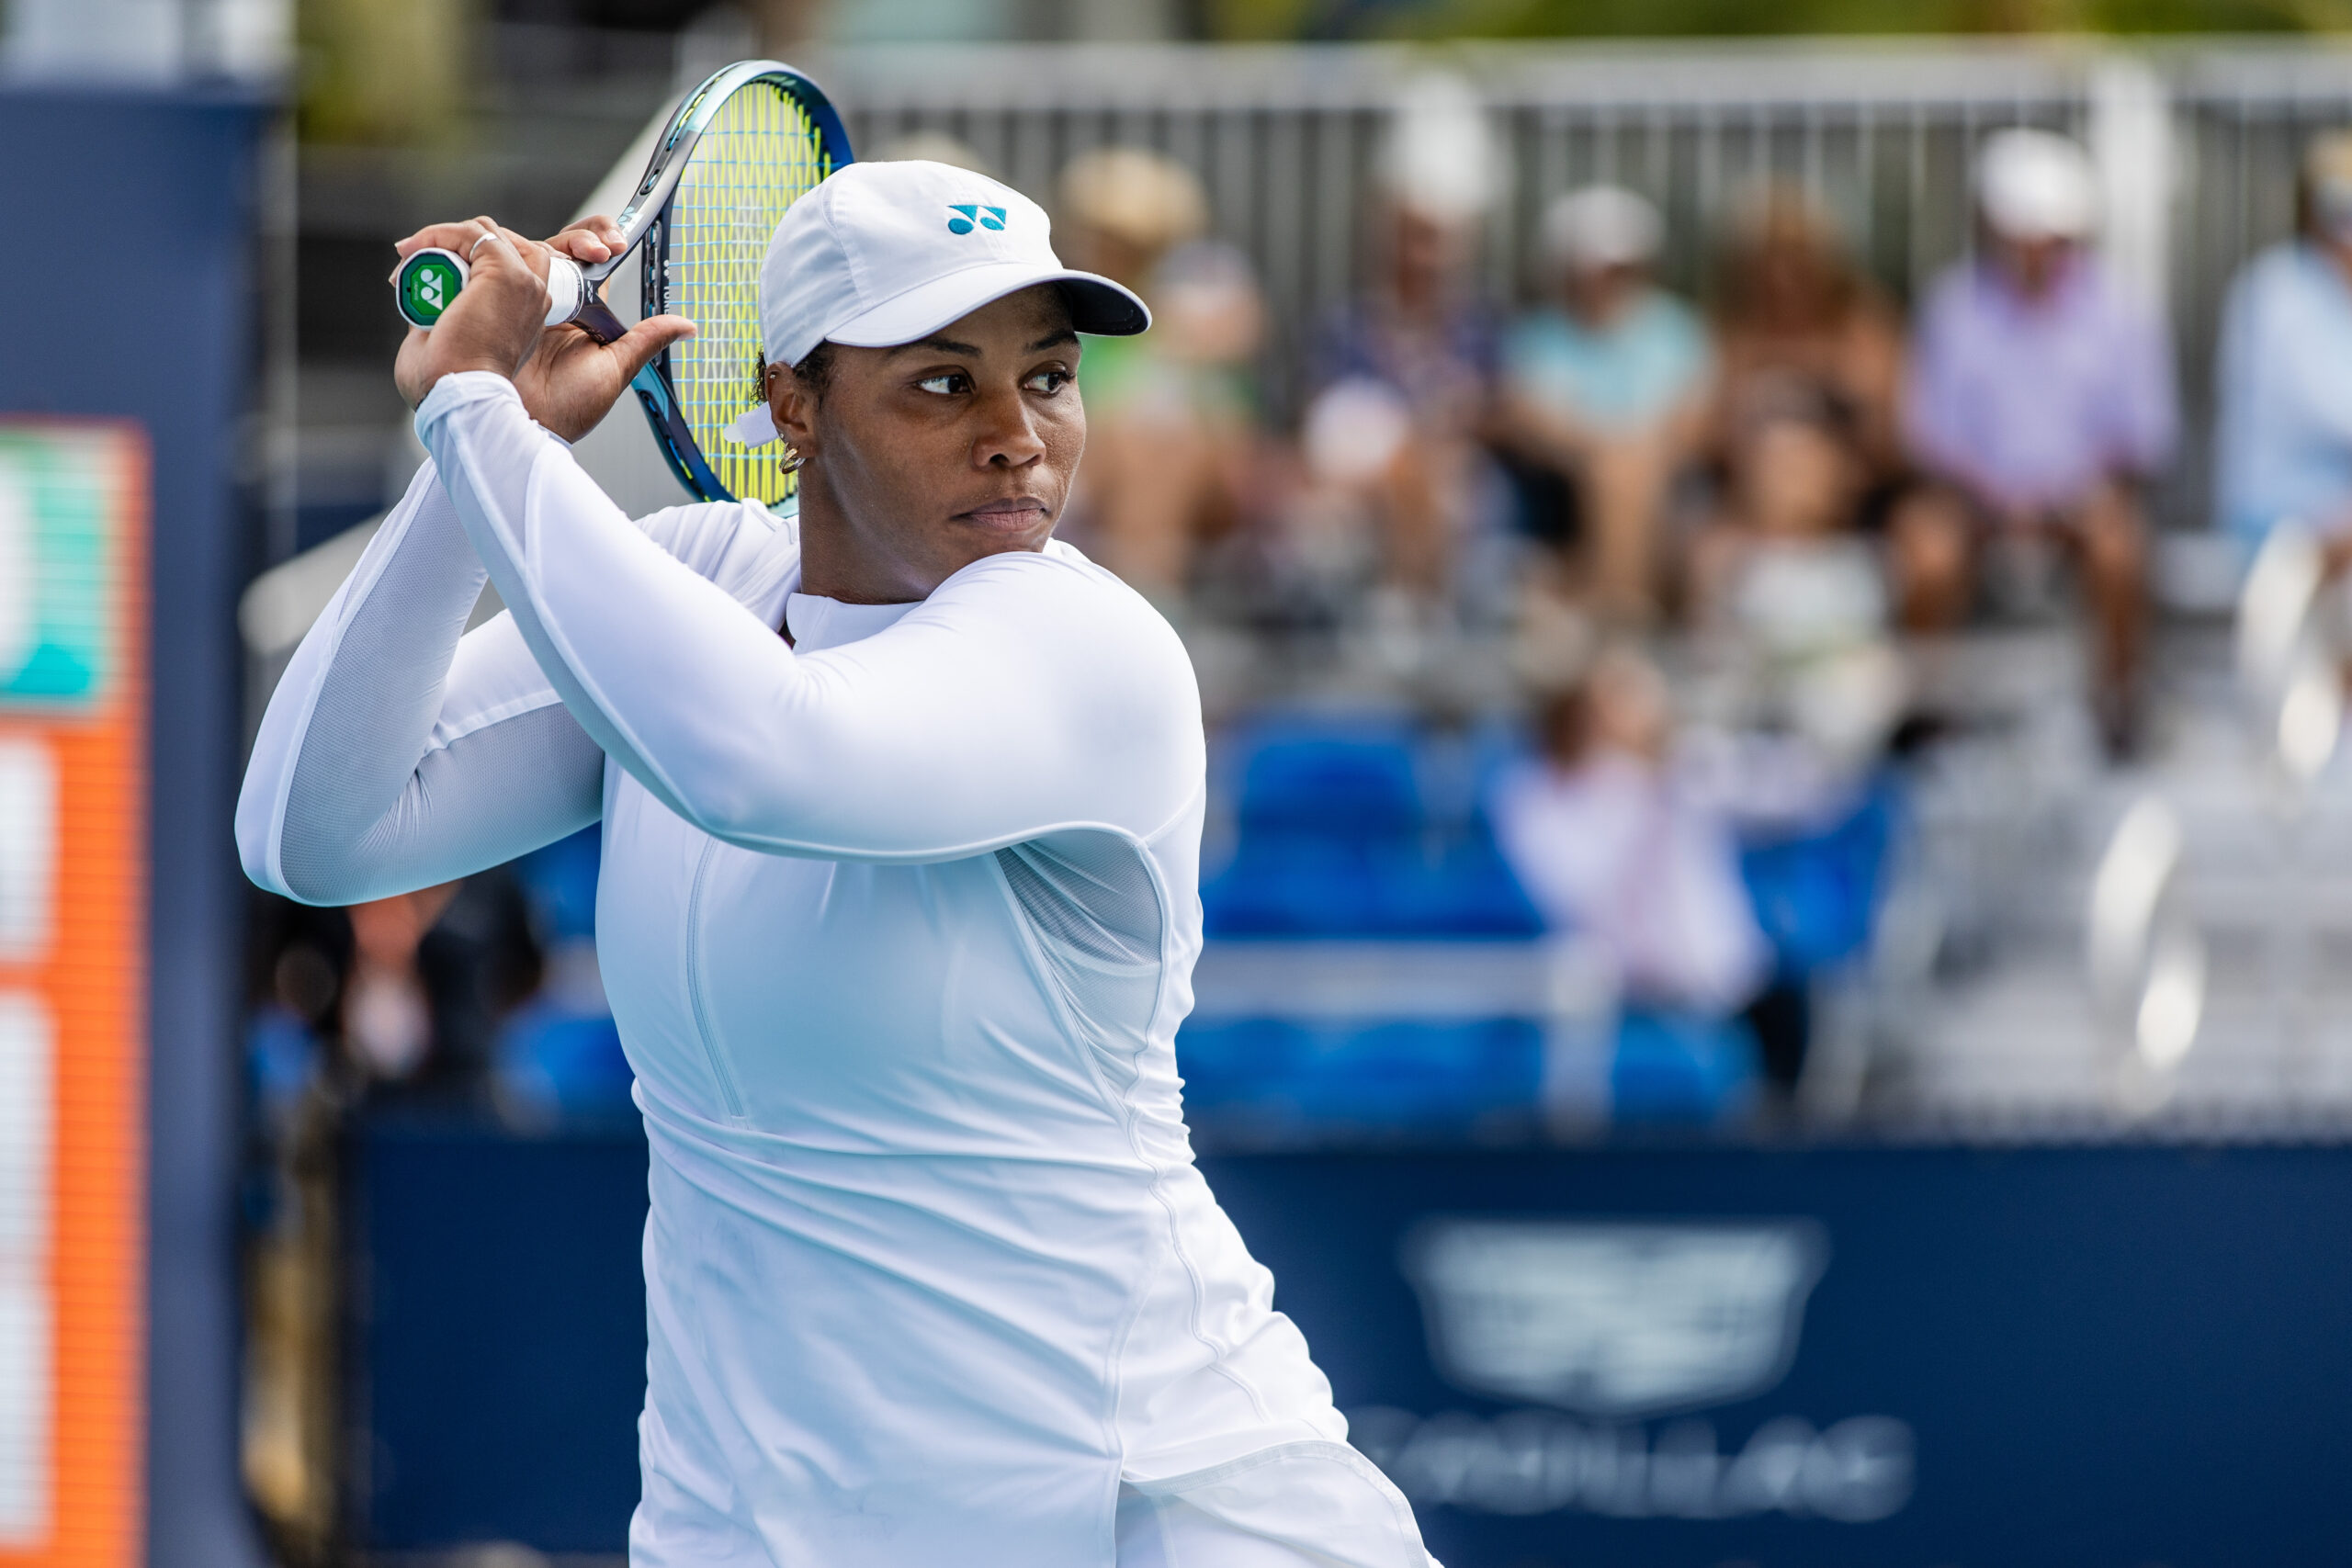 Taylor Townsend keeps living her Tale in Miami, moves to third round